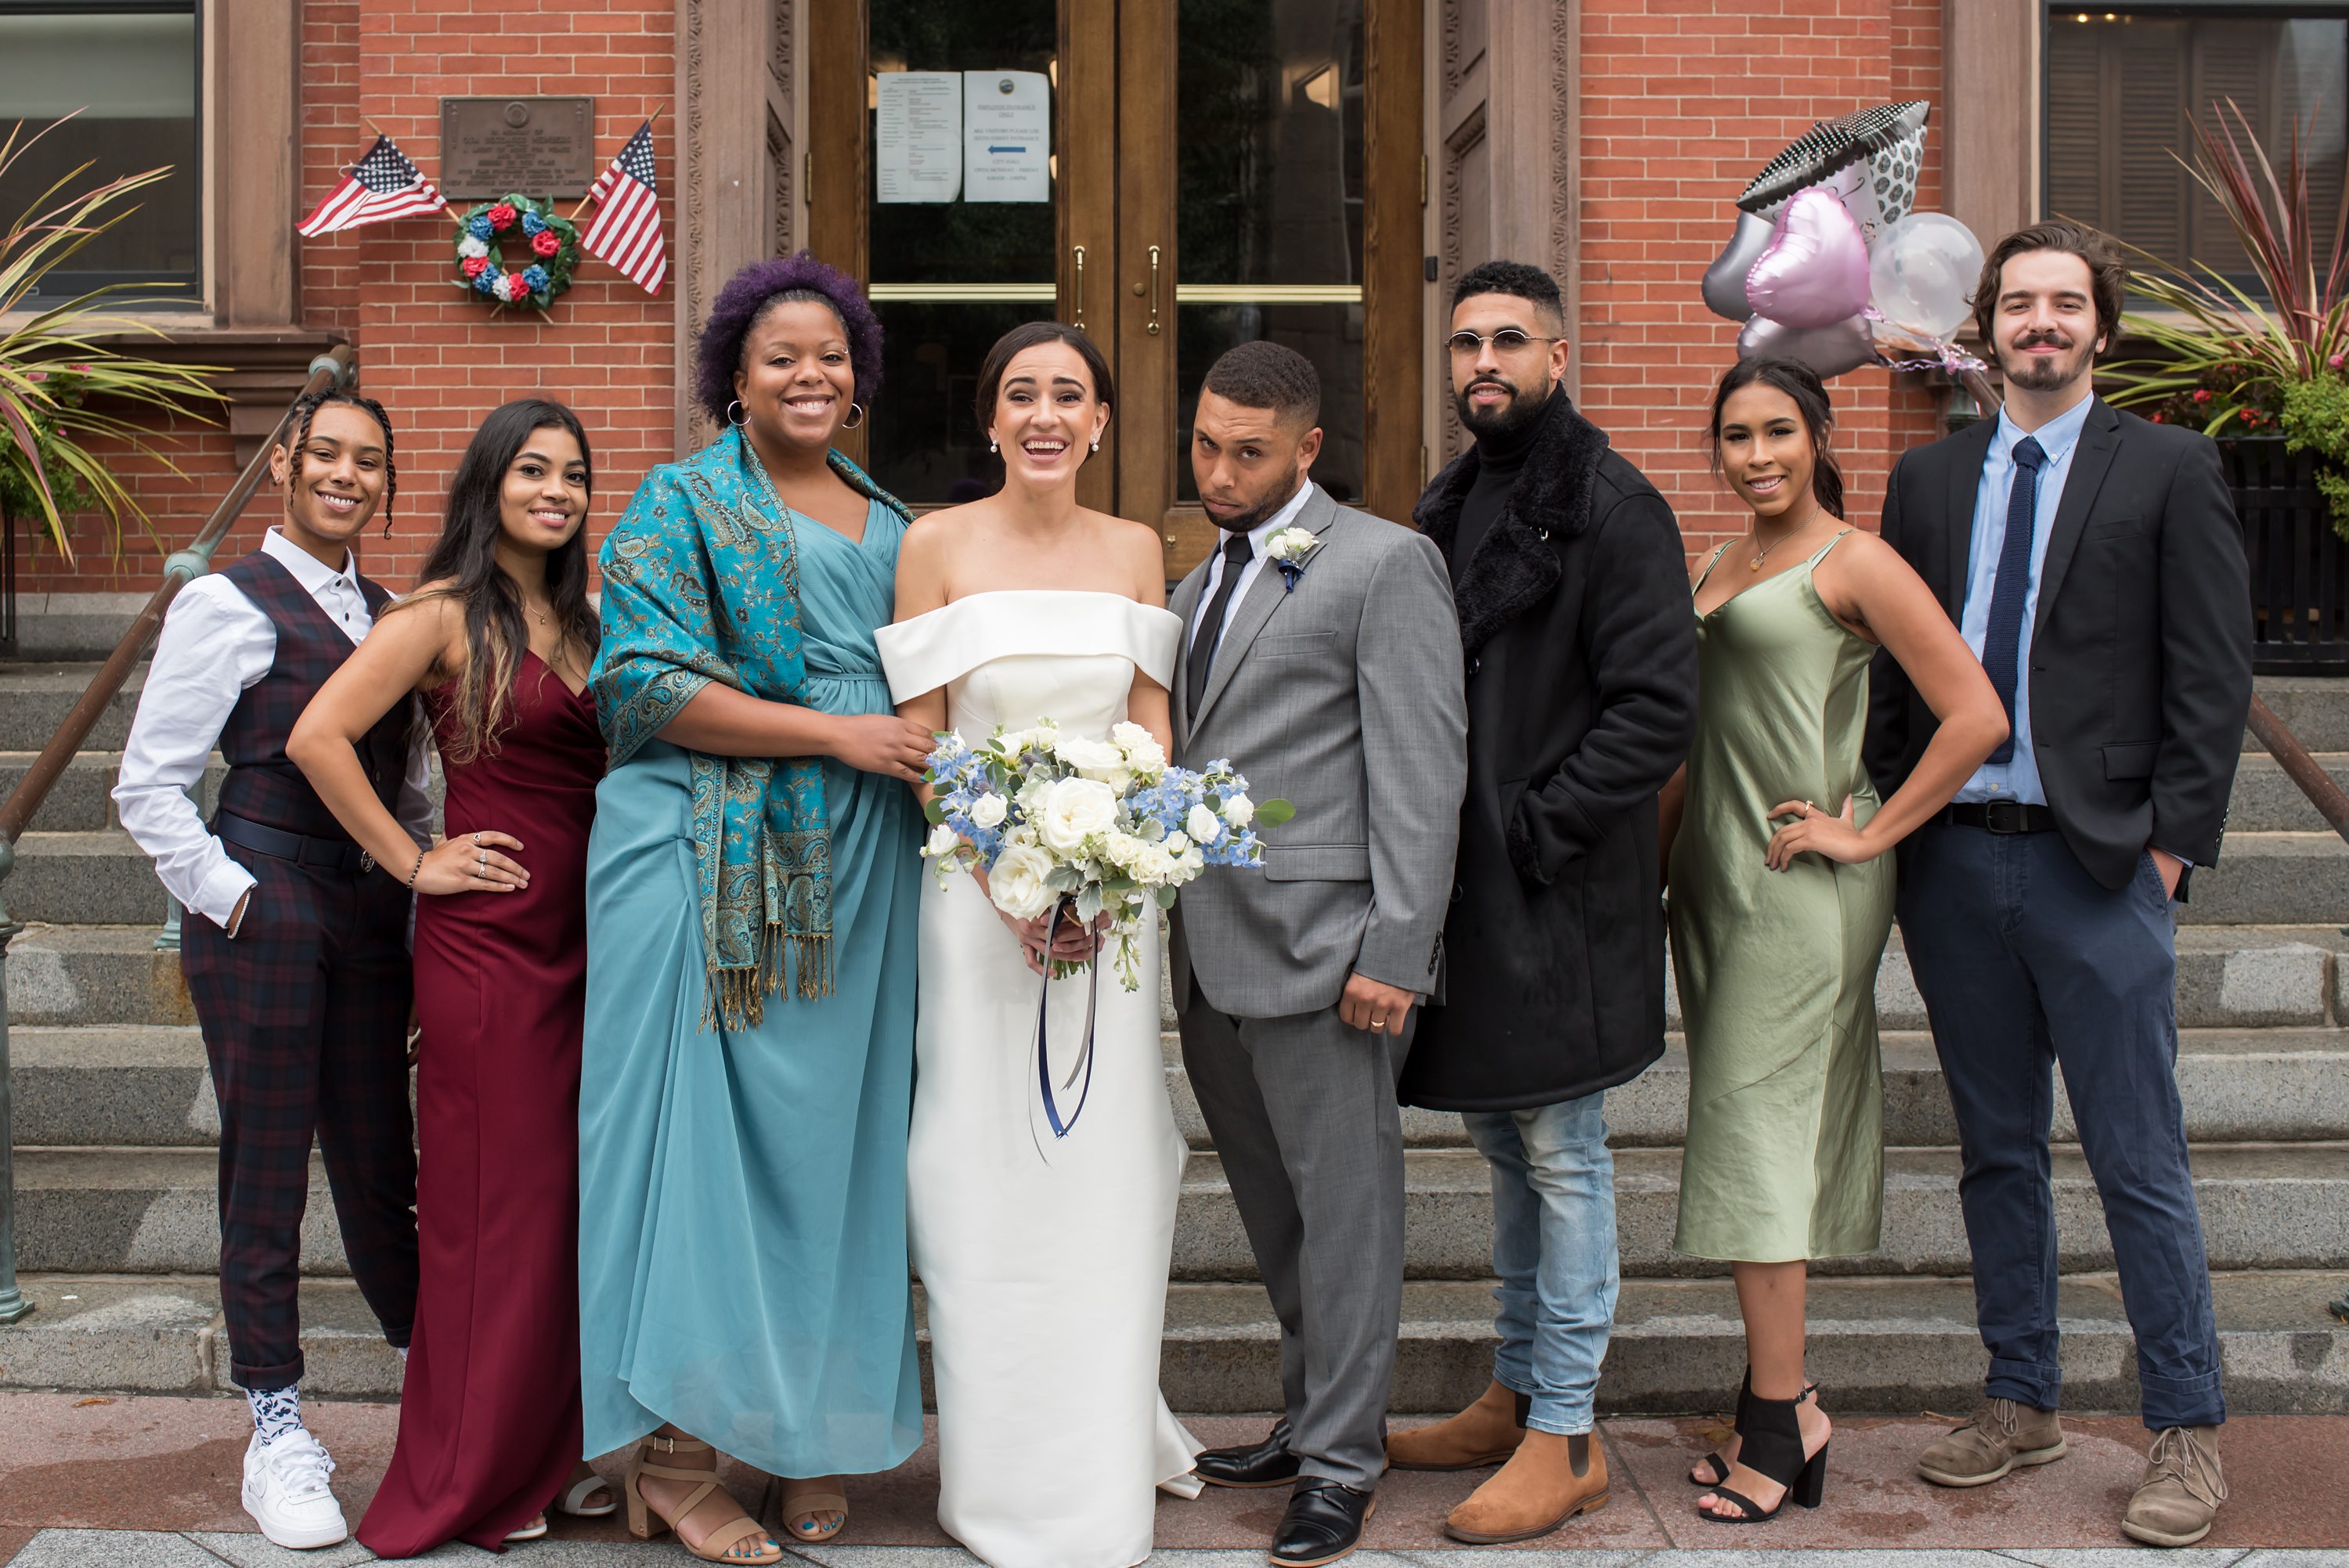 Providence Wedding Photographer,New Bedford City Hall,City Hall Wedding,City Hall Elopement,New Bedford City Hall Elopement,New Bedford Wedding,Intimate backyard wedding,Intimate backyard elopement,Providence Public Library Wedding,Russell Morin Catering